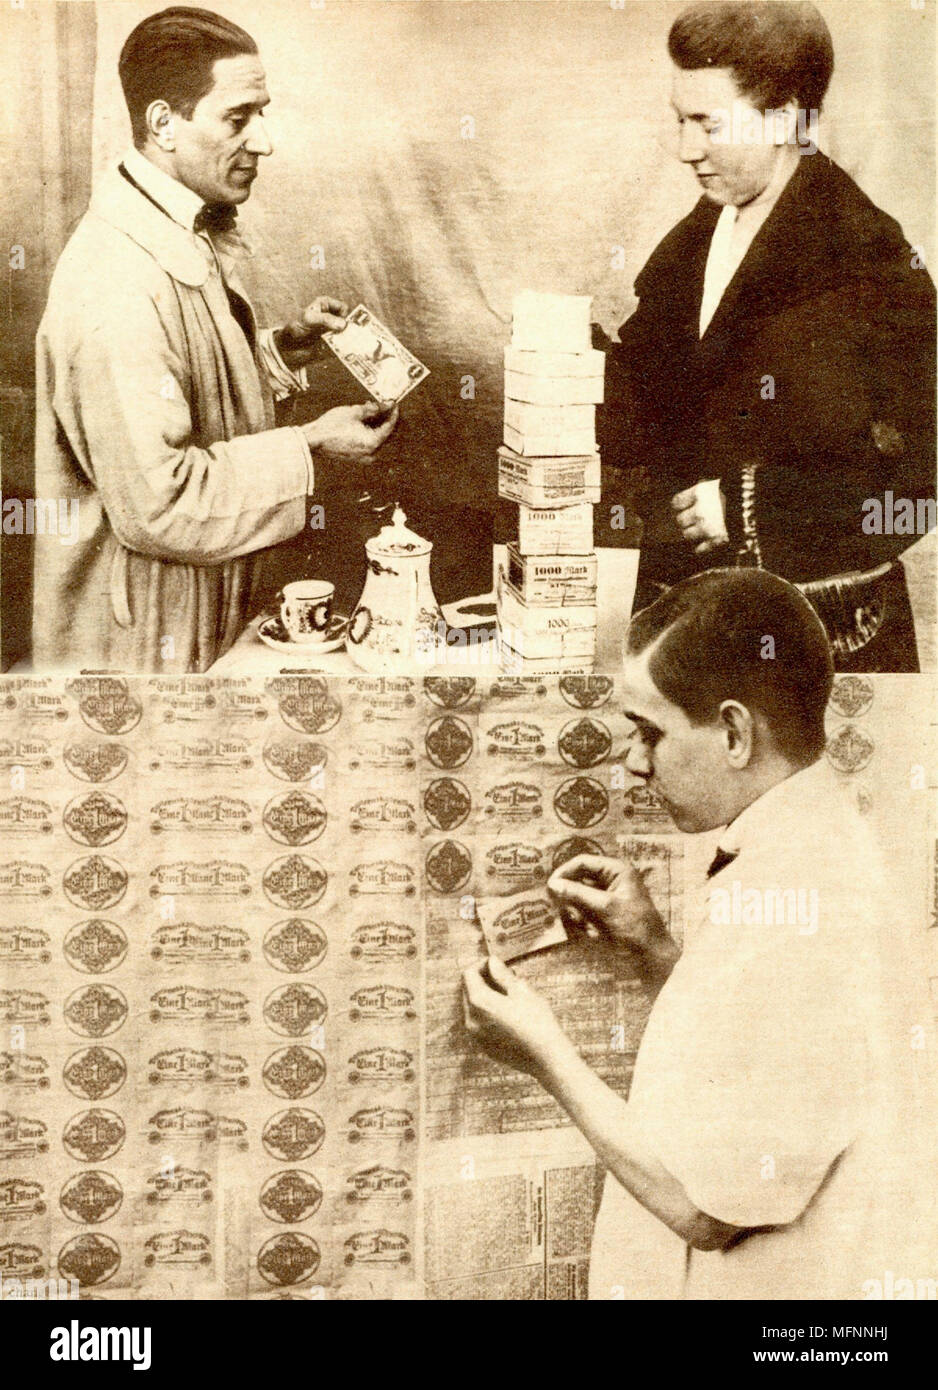 Money is worthless in Germany during the Hyperinflation of 1923-1924. Here it is used to paper the walls. Stock Photo